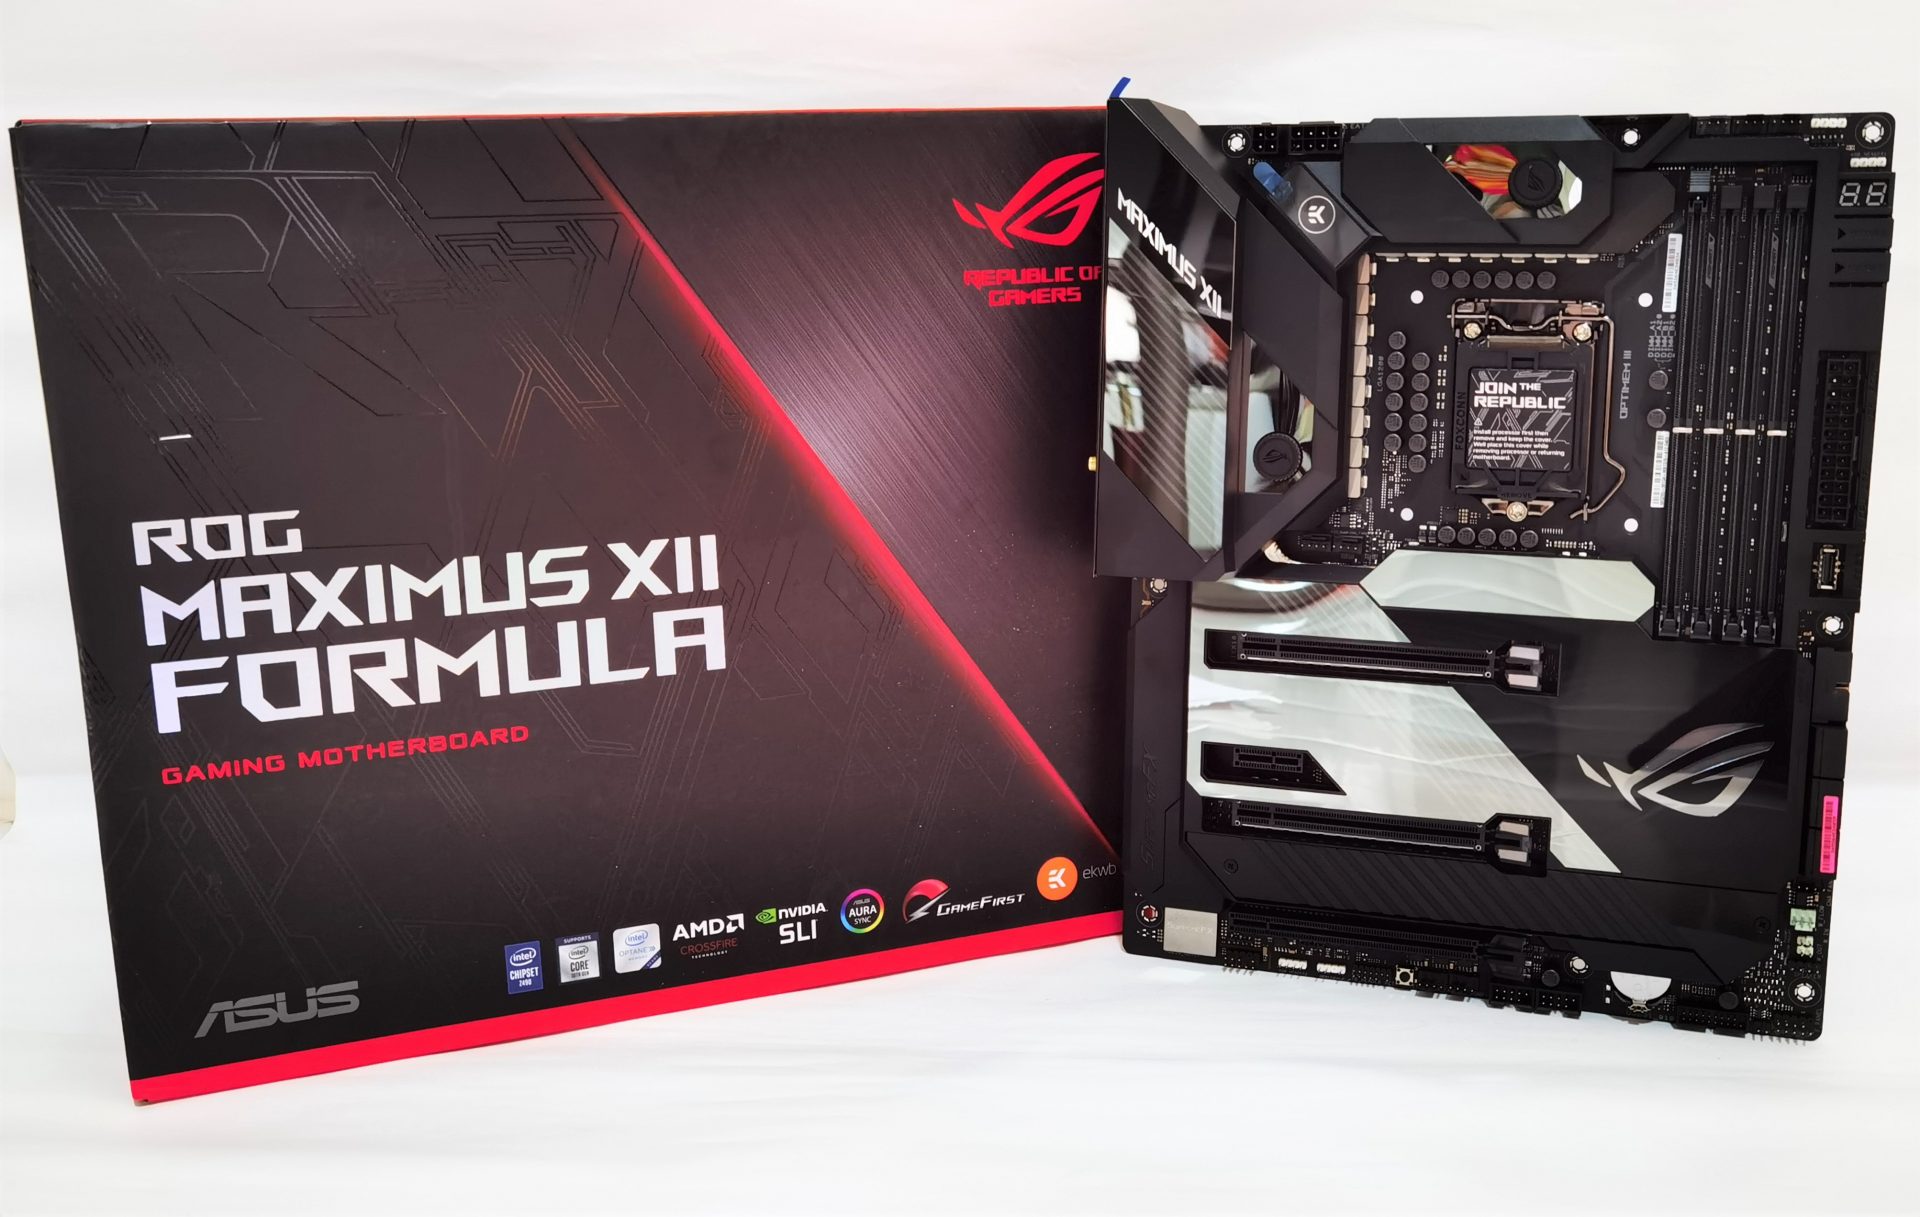 ASUS ROG Maximus XII Formula Motherboard Overview and Features